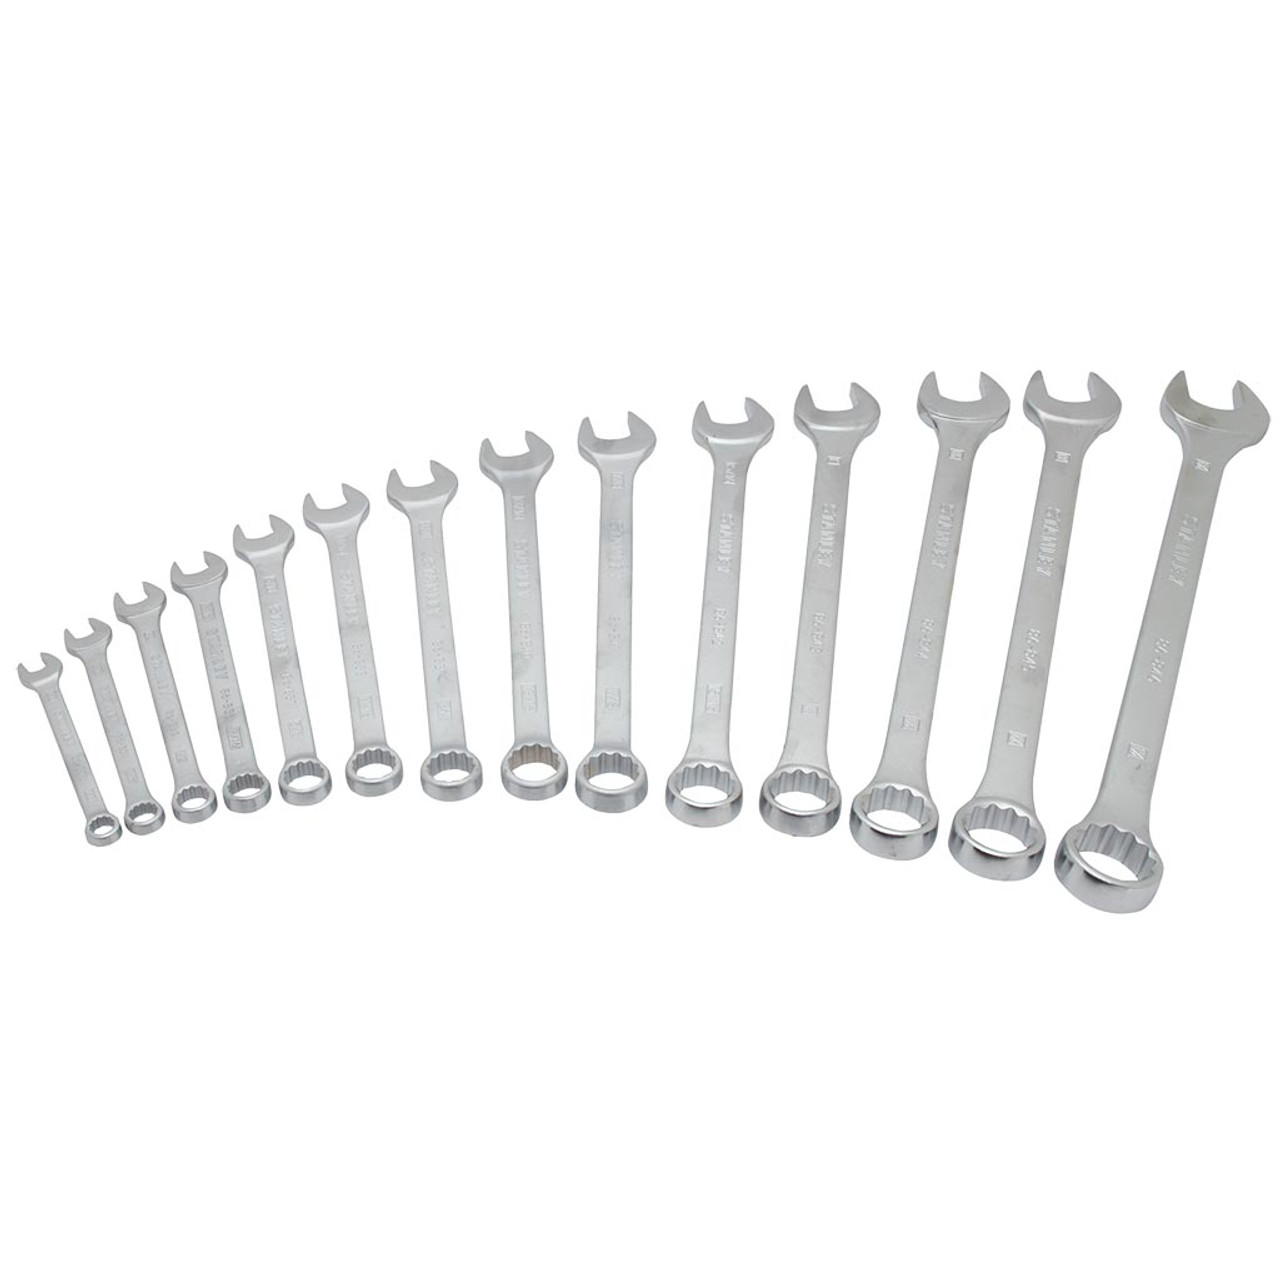 Stanley 94-385W 11-Piece SAE Combination Wrench Set